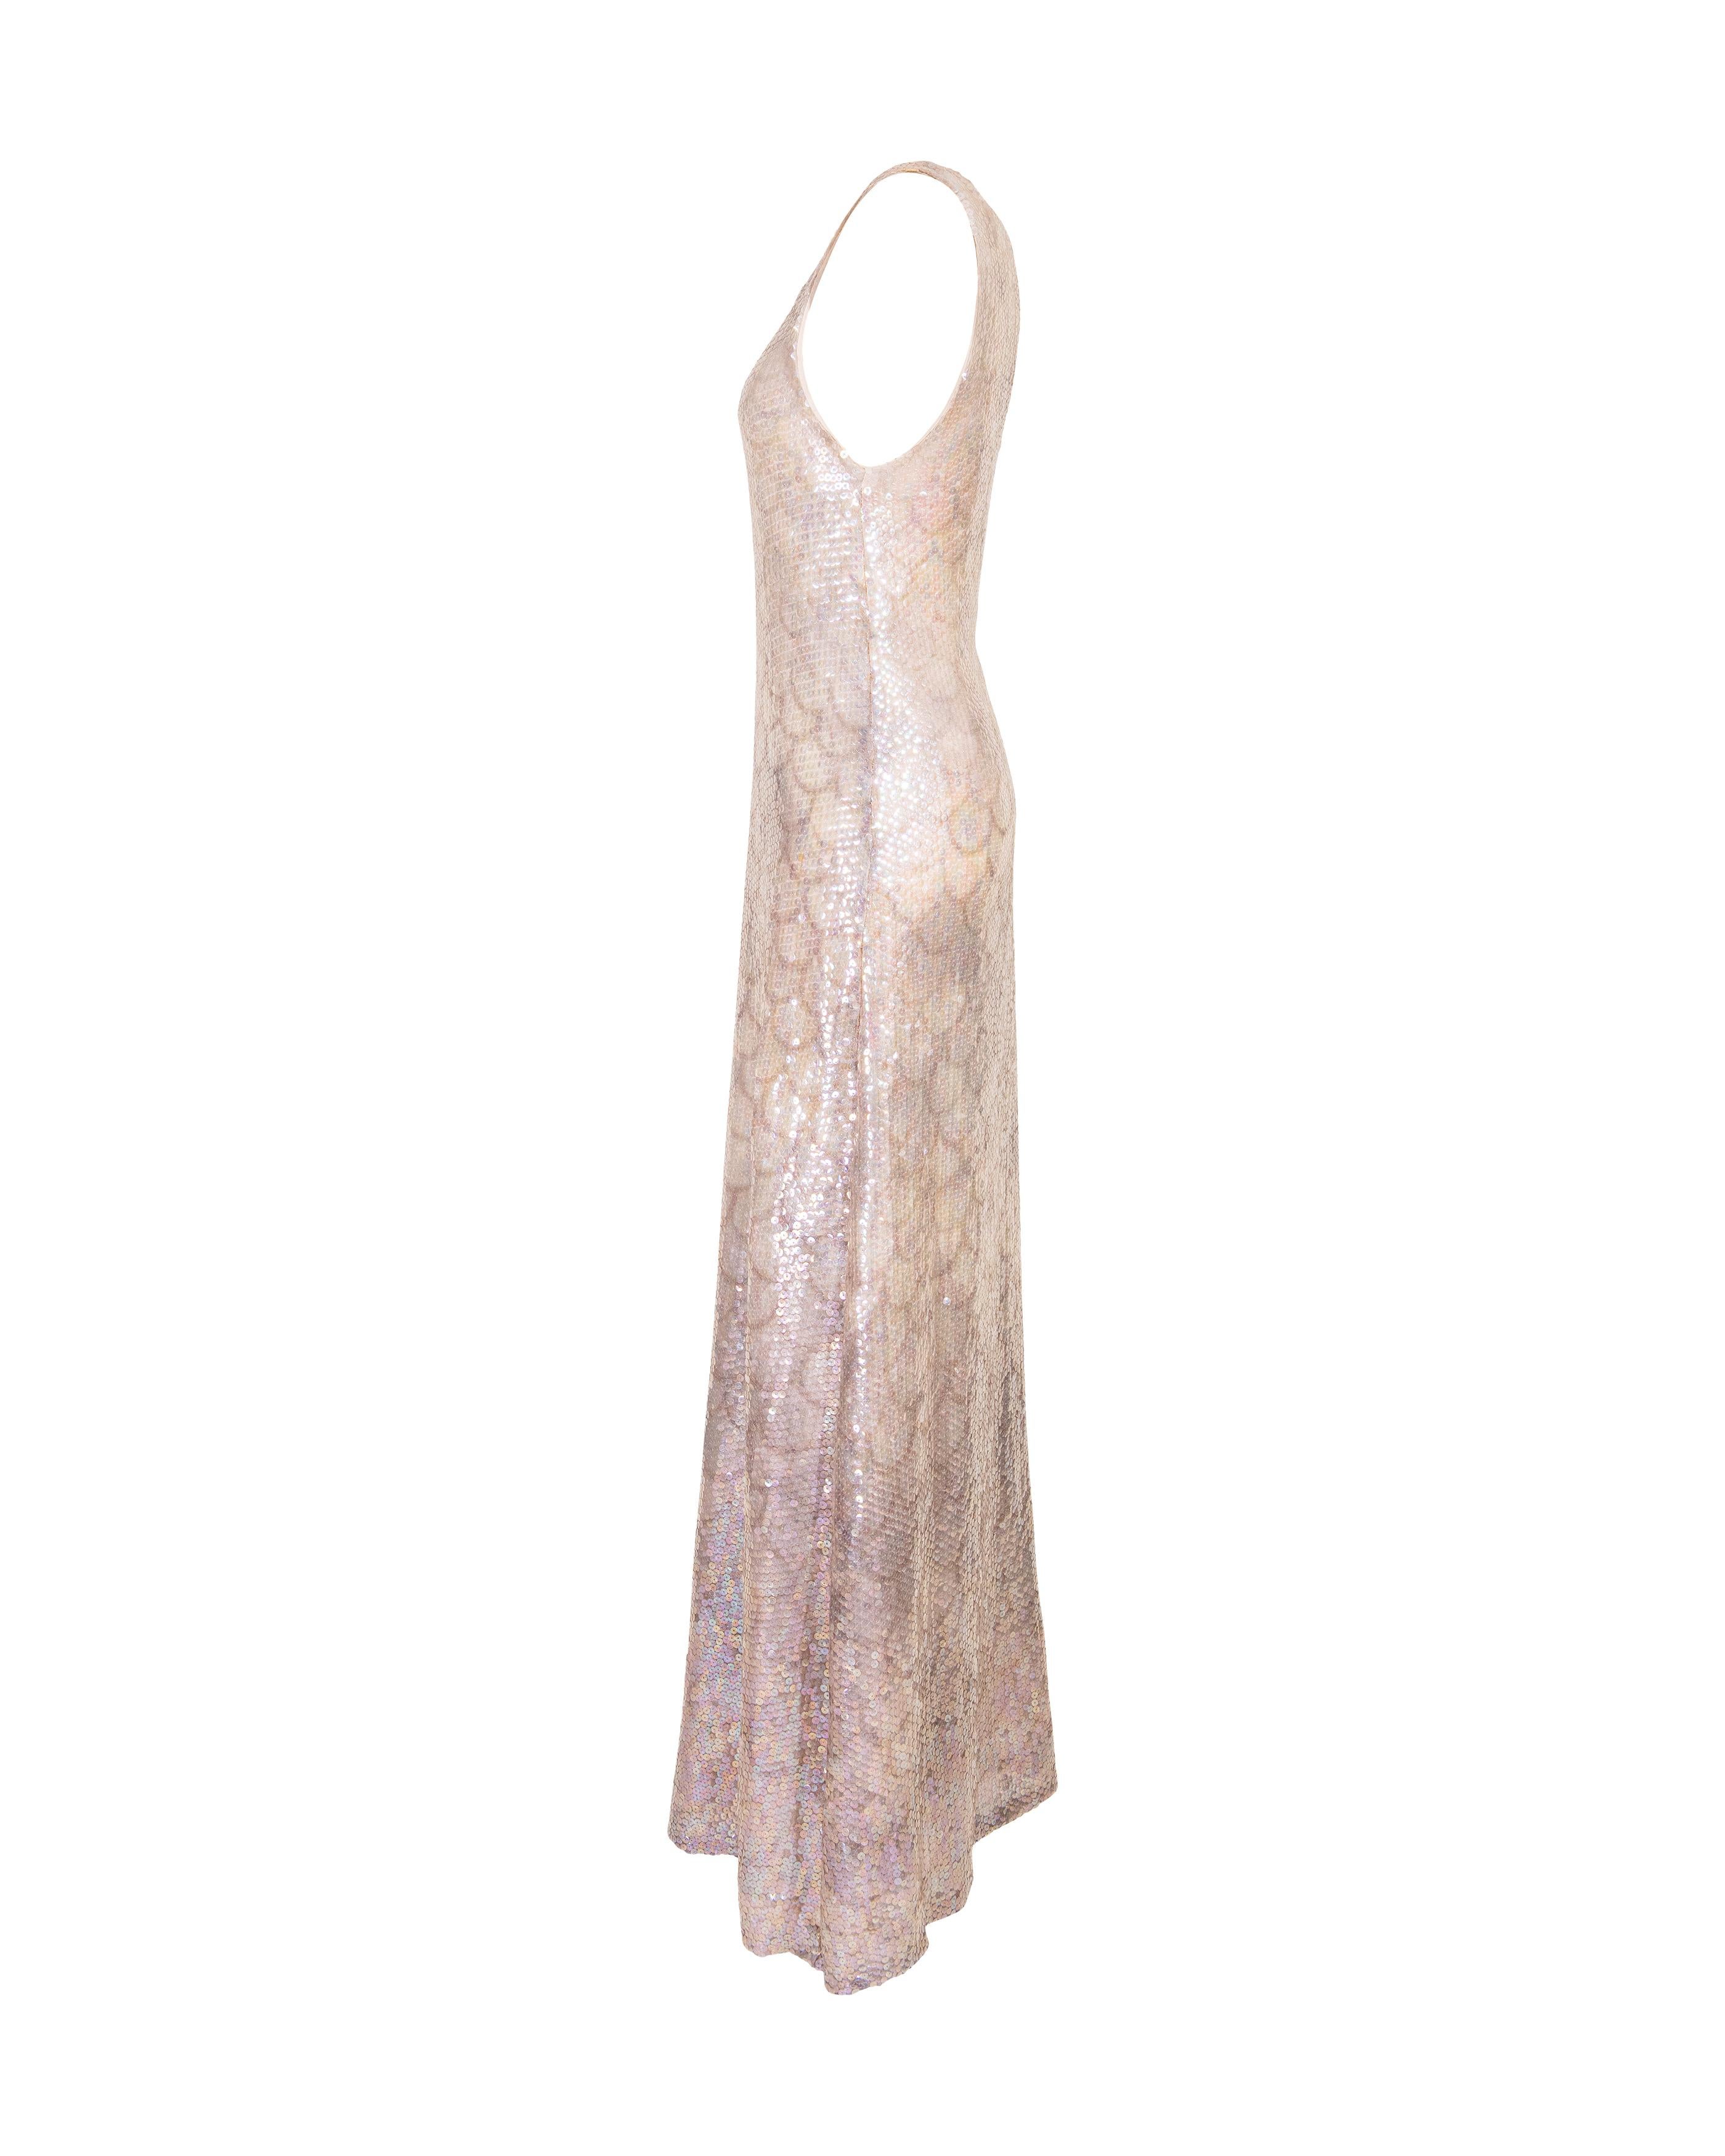 Women's A/W 1973 Halston Sleeveless Sequin 'Scale' Gradient Gown